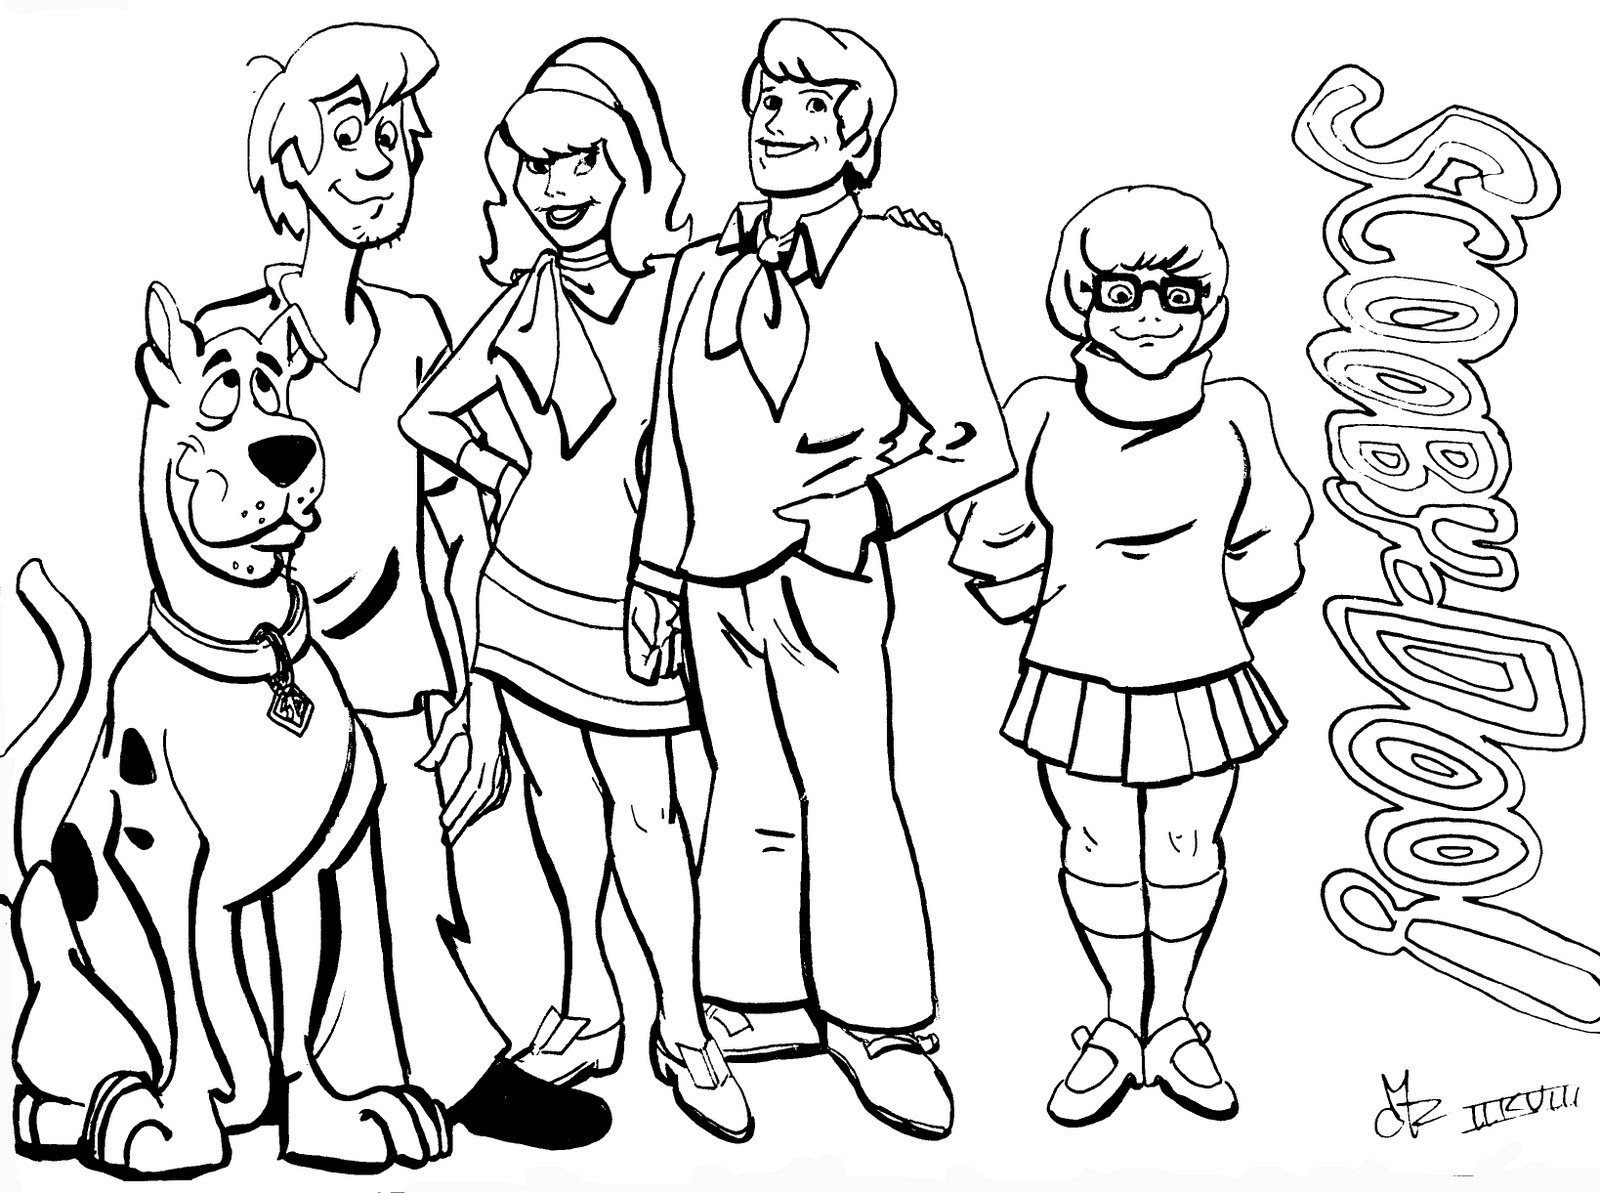 Scooby Doo Coloring Pages Pdf 15 Image Coloringsnet